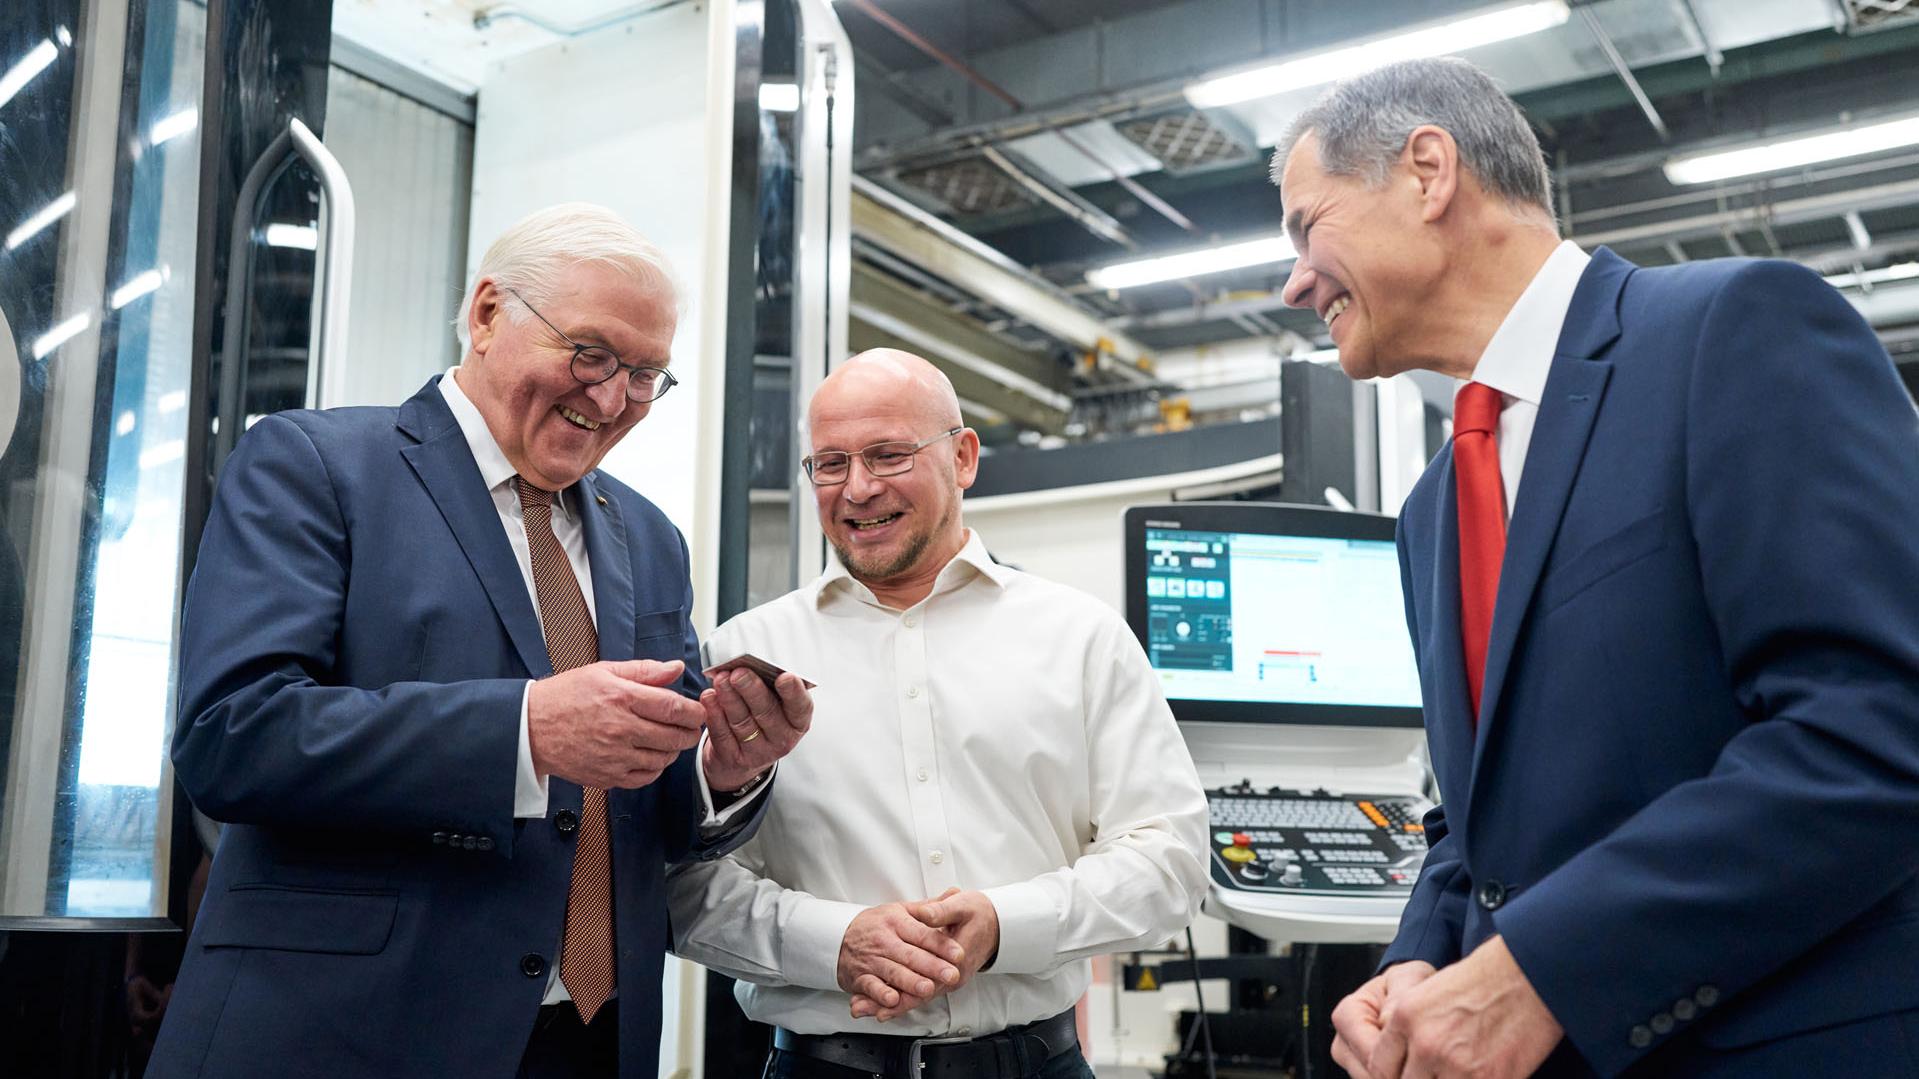 Federal President Frank-Walter Steinmeier visiting the ZEISS mechanics production area in Jena: President Steinmeier, Ronny Schäfer, Head of Mechanics Production at ZEISS in Jena, Dr. Karl Lamprecht, CEO of the ZEISS Group (left to right)